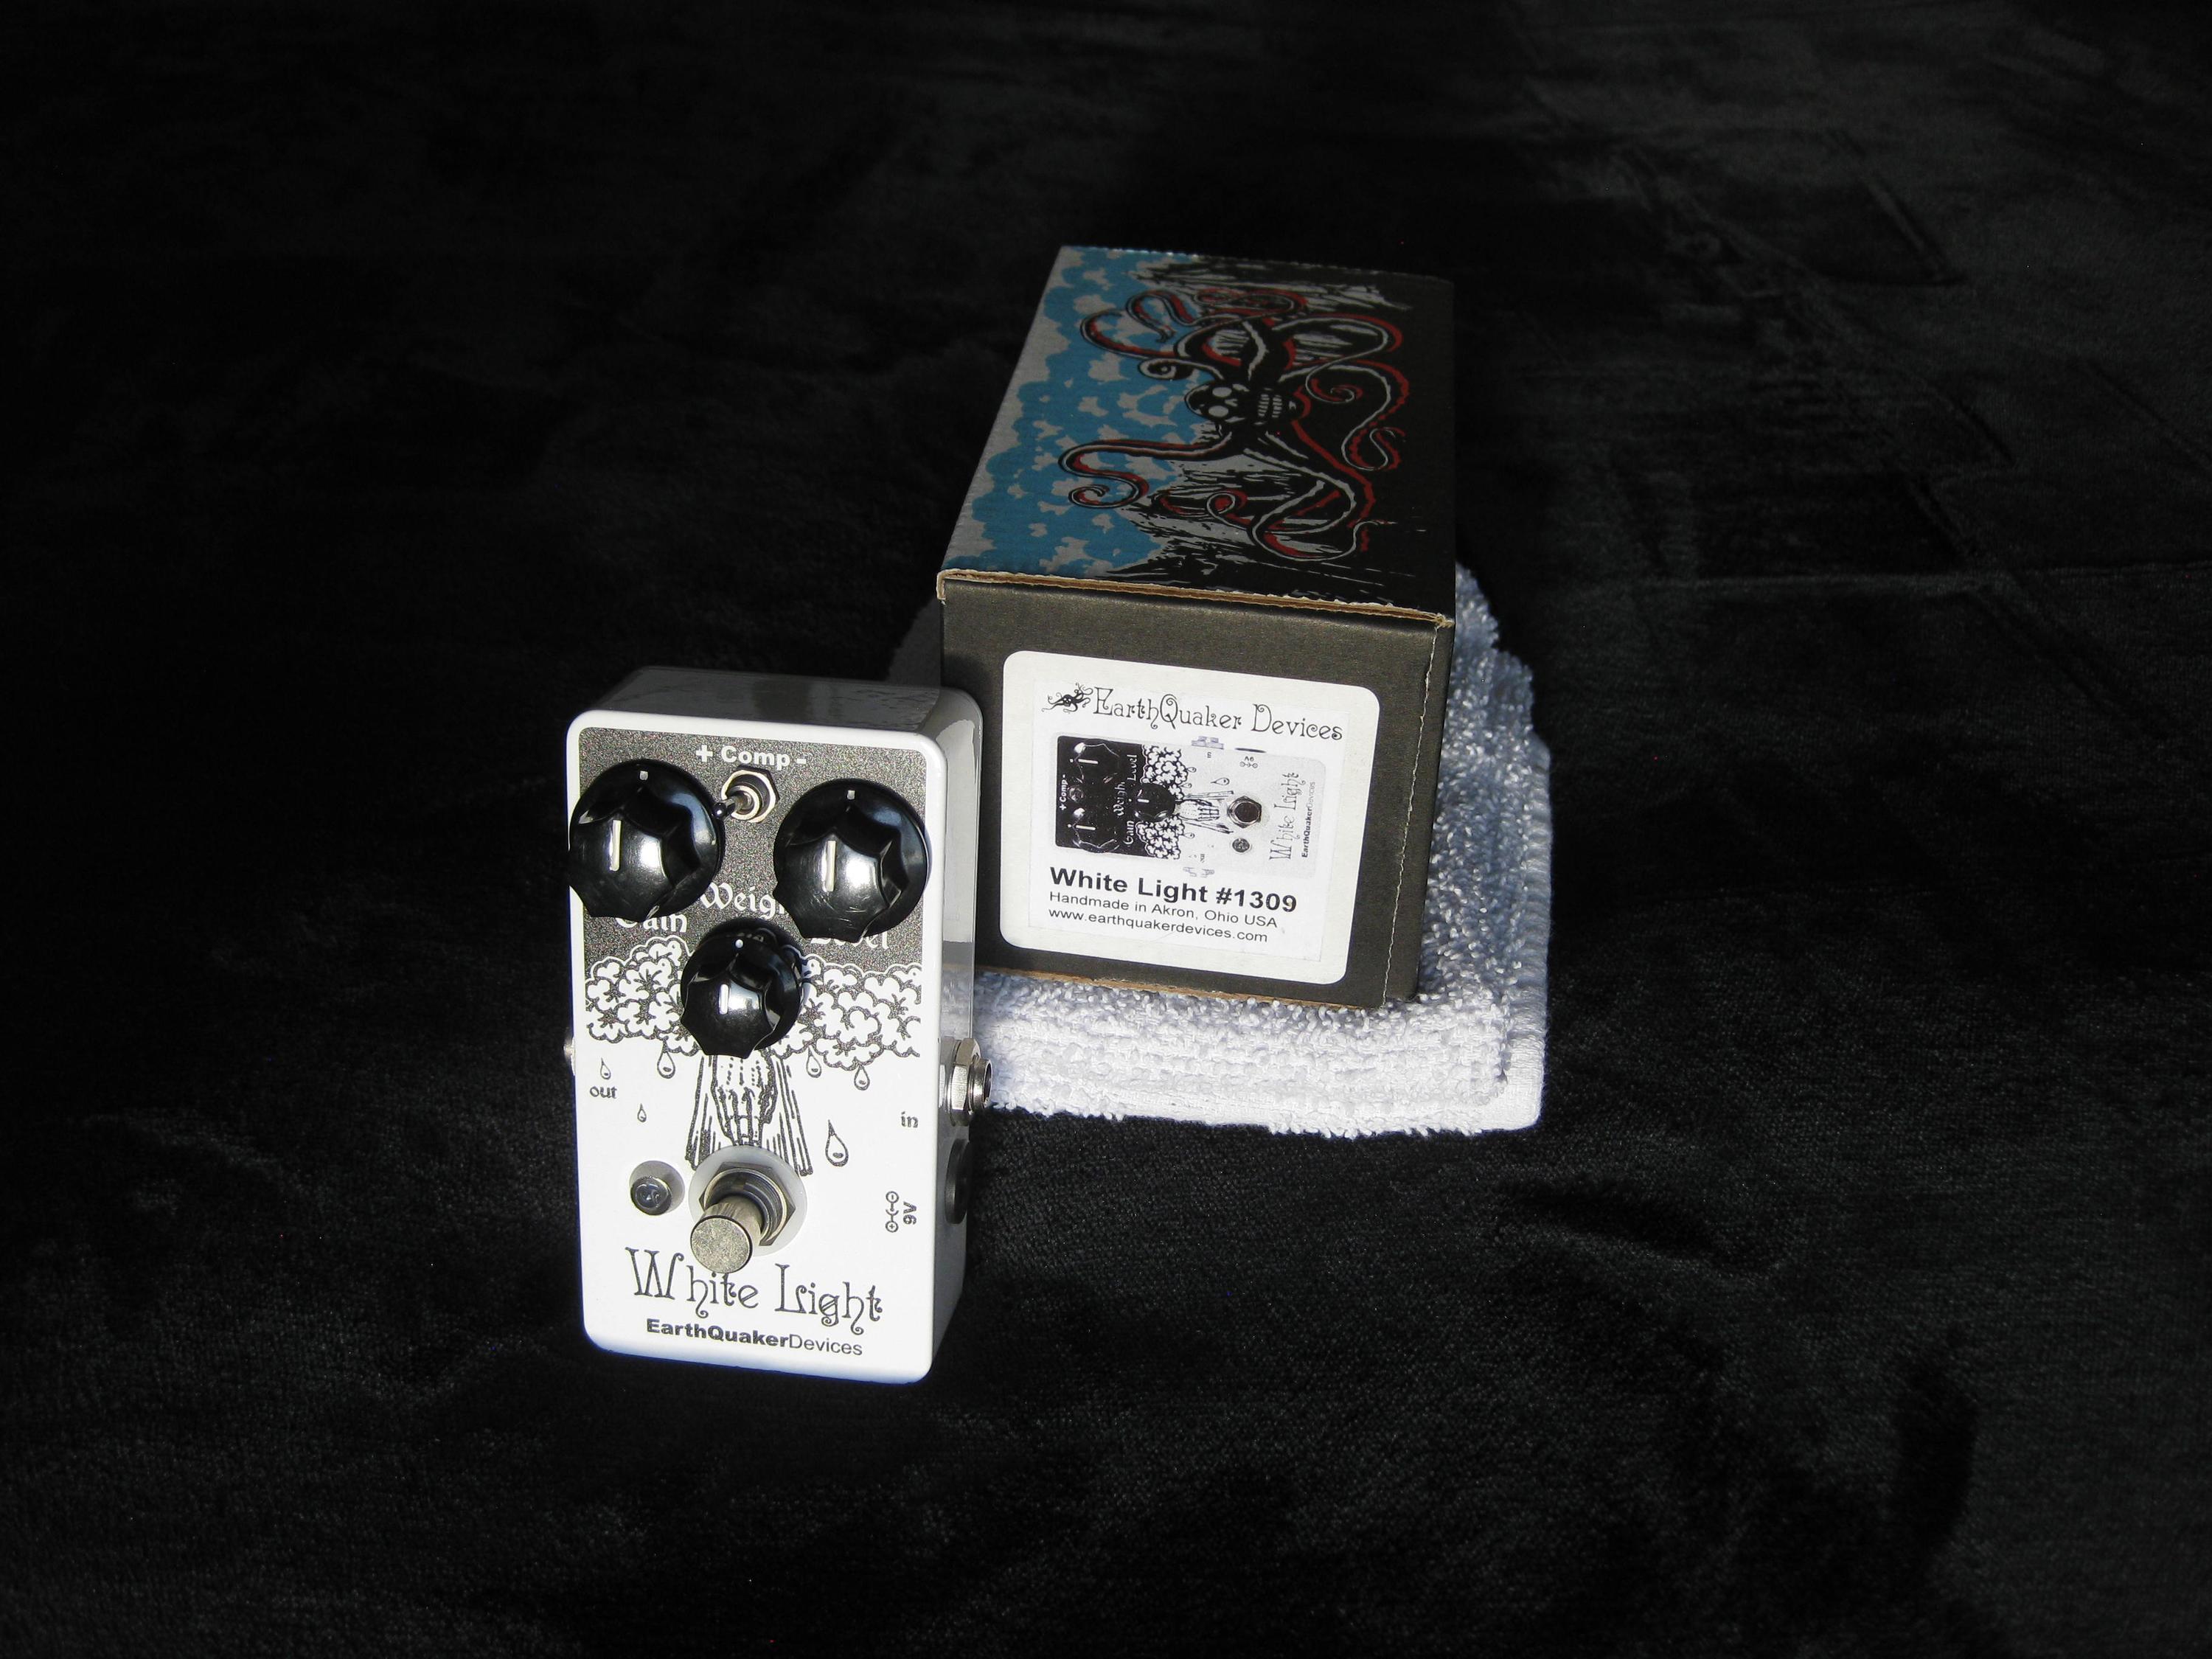 Used EarthQuaker Devices White Light - Sweetwater's Gear Exchange